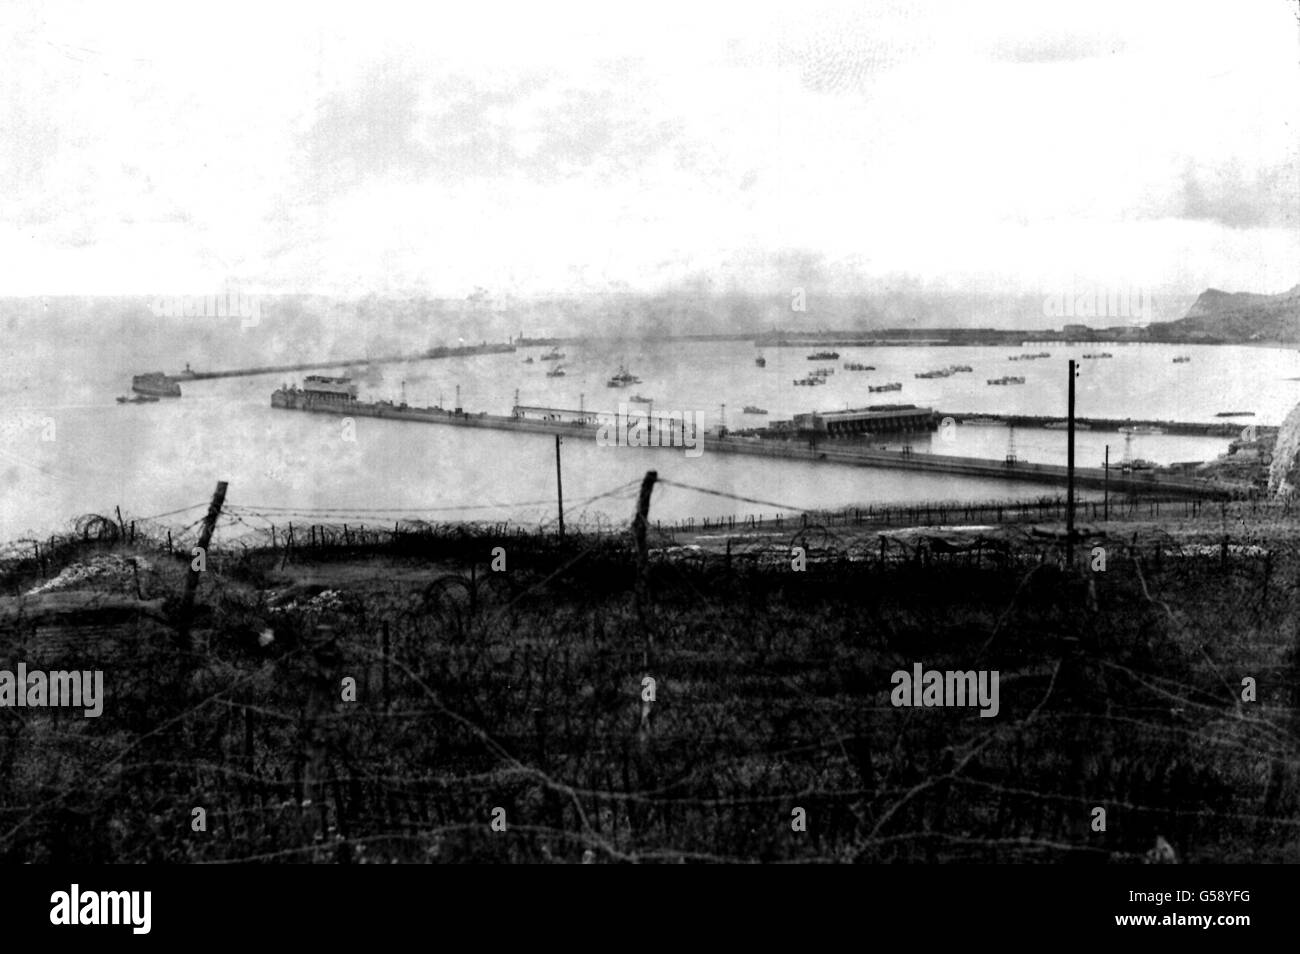 1944: Smoke drifts across Dover harbour, Kent. In the foreground are belts of barbed wire used as part of the British coastal defences. Both naval and civilian craft can be seen. Picture part of PA Second World War collection. Stock Photo